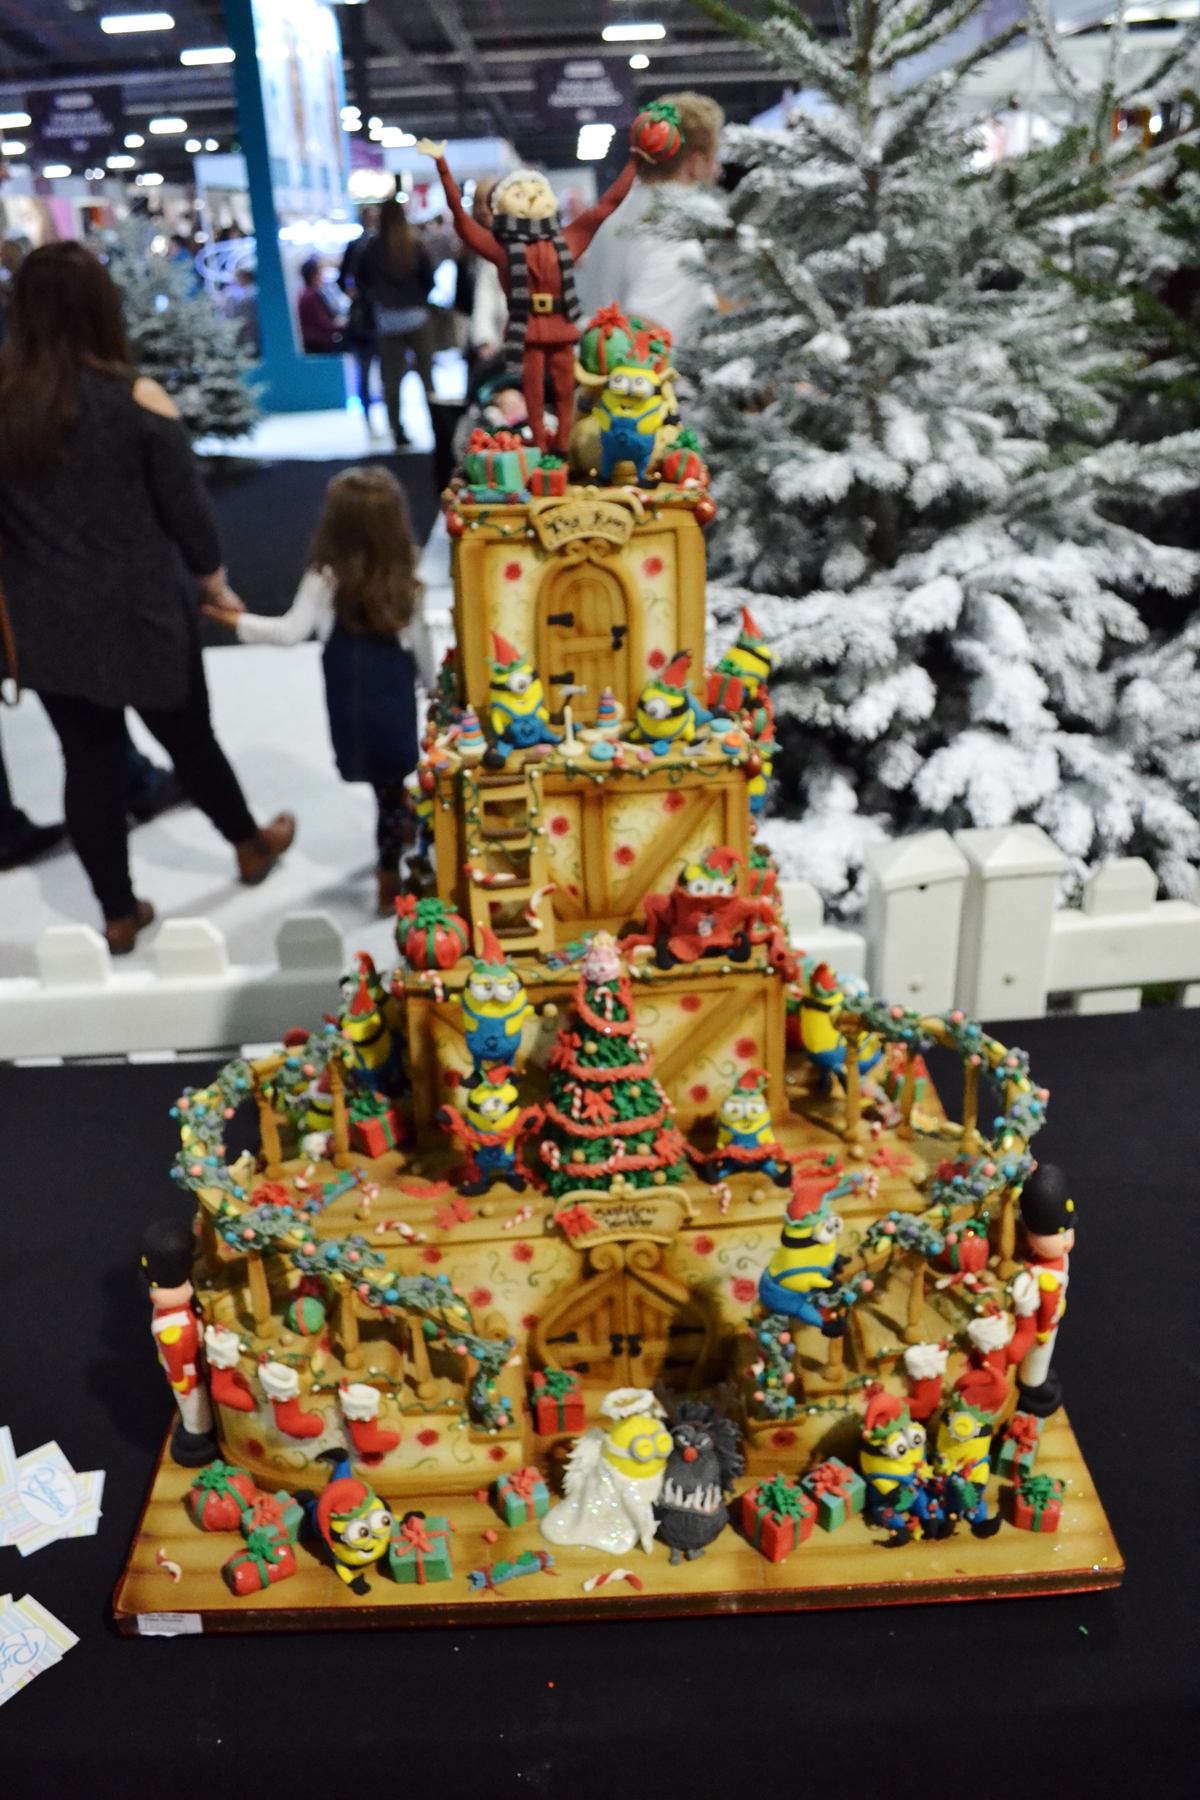 cake and bake show event city manchester 2016 gingerbread house ccake